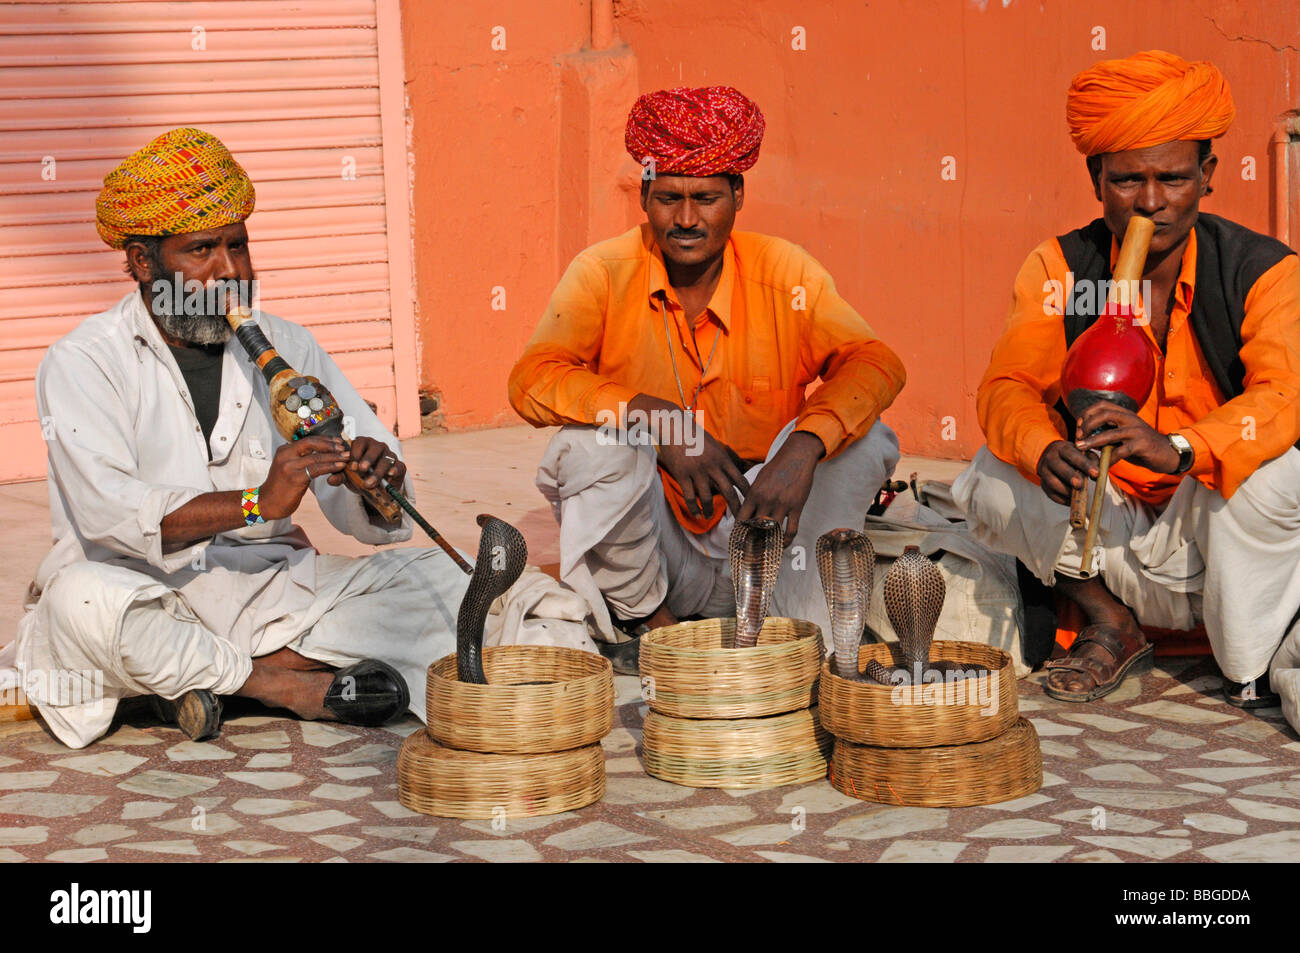 Indian snake charmers with cobras (Naja naja), the Palace of Winds, Jaipur, Rajasthan, northern India, Asia Stock Photo